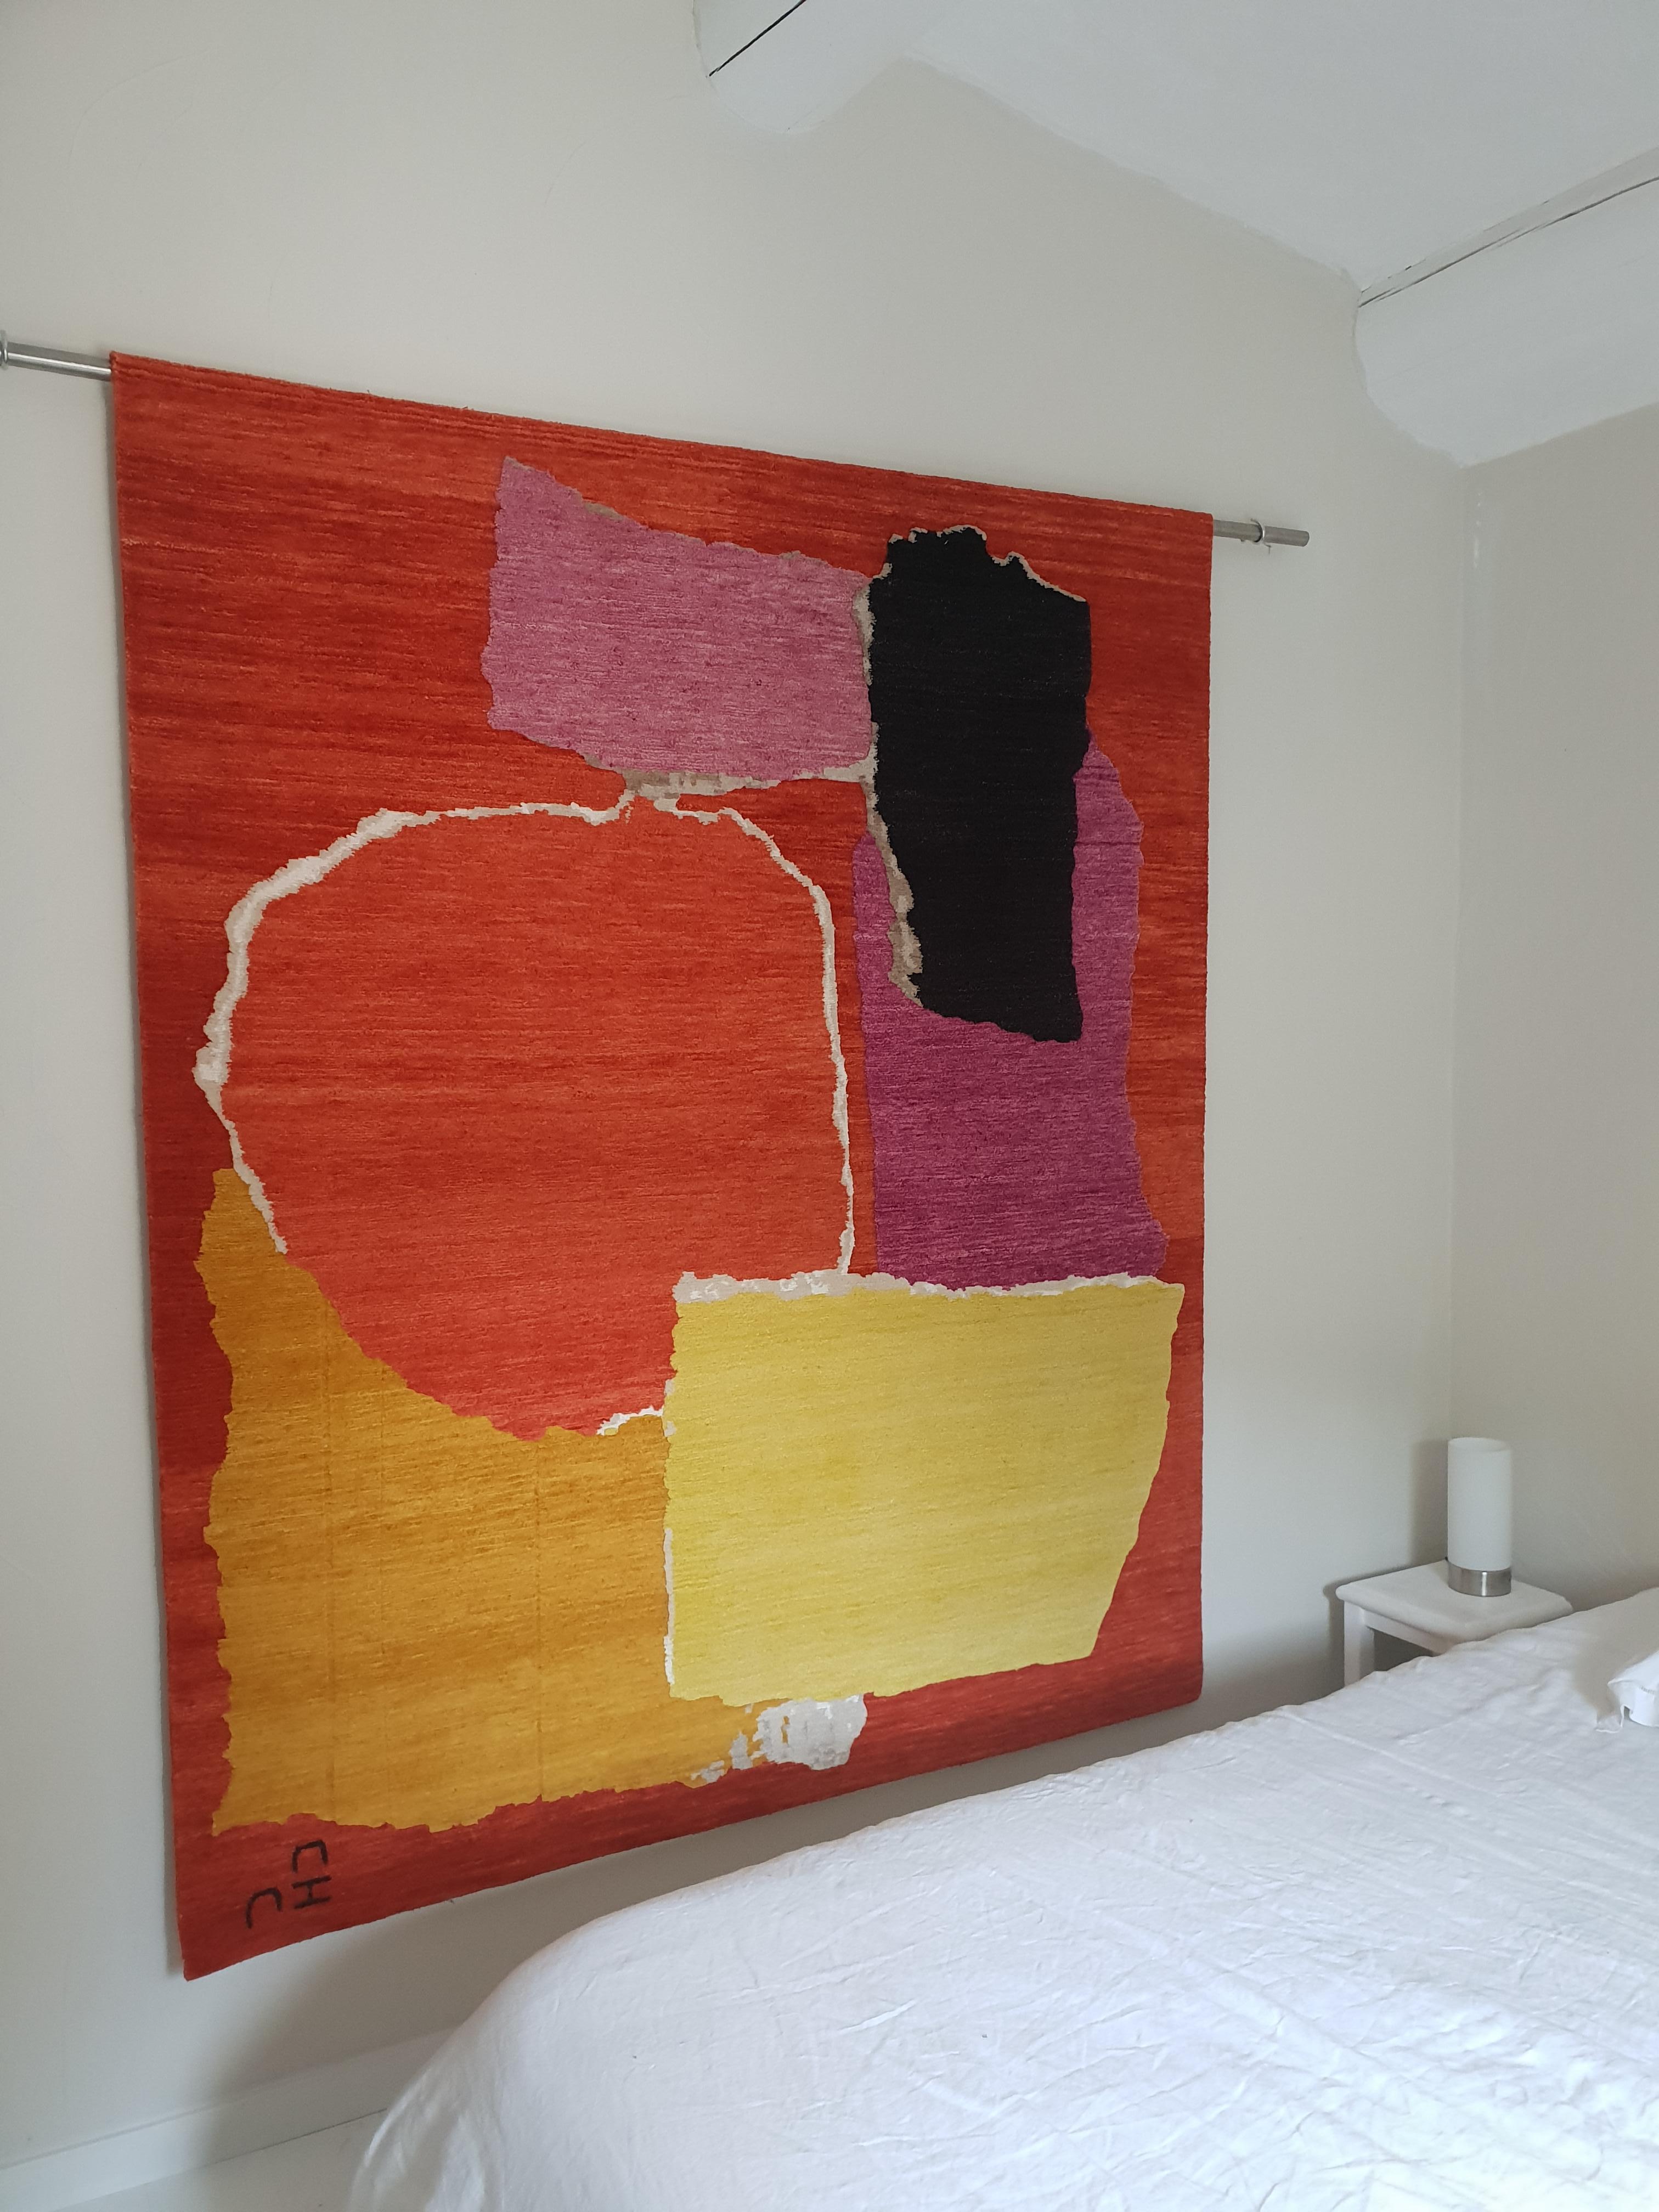 Rhizomes 1 colorful hand knotted rug by Charlotte Culot
Edition: 8
Signed
Dimensions: 190 x 155 cm
Materials: silk, wool, linen, allo
Hand knotted.

During a visit to Château La Coste in 2018 Charlotte Culot was inspired by a strikingly